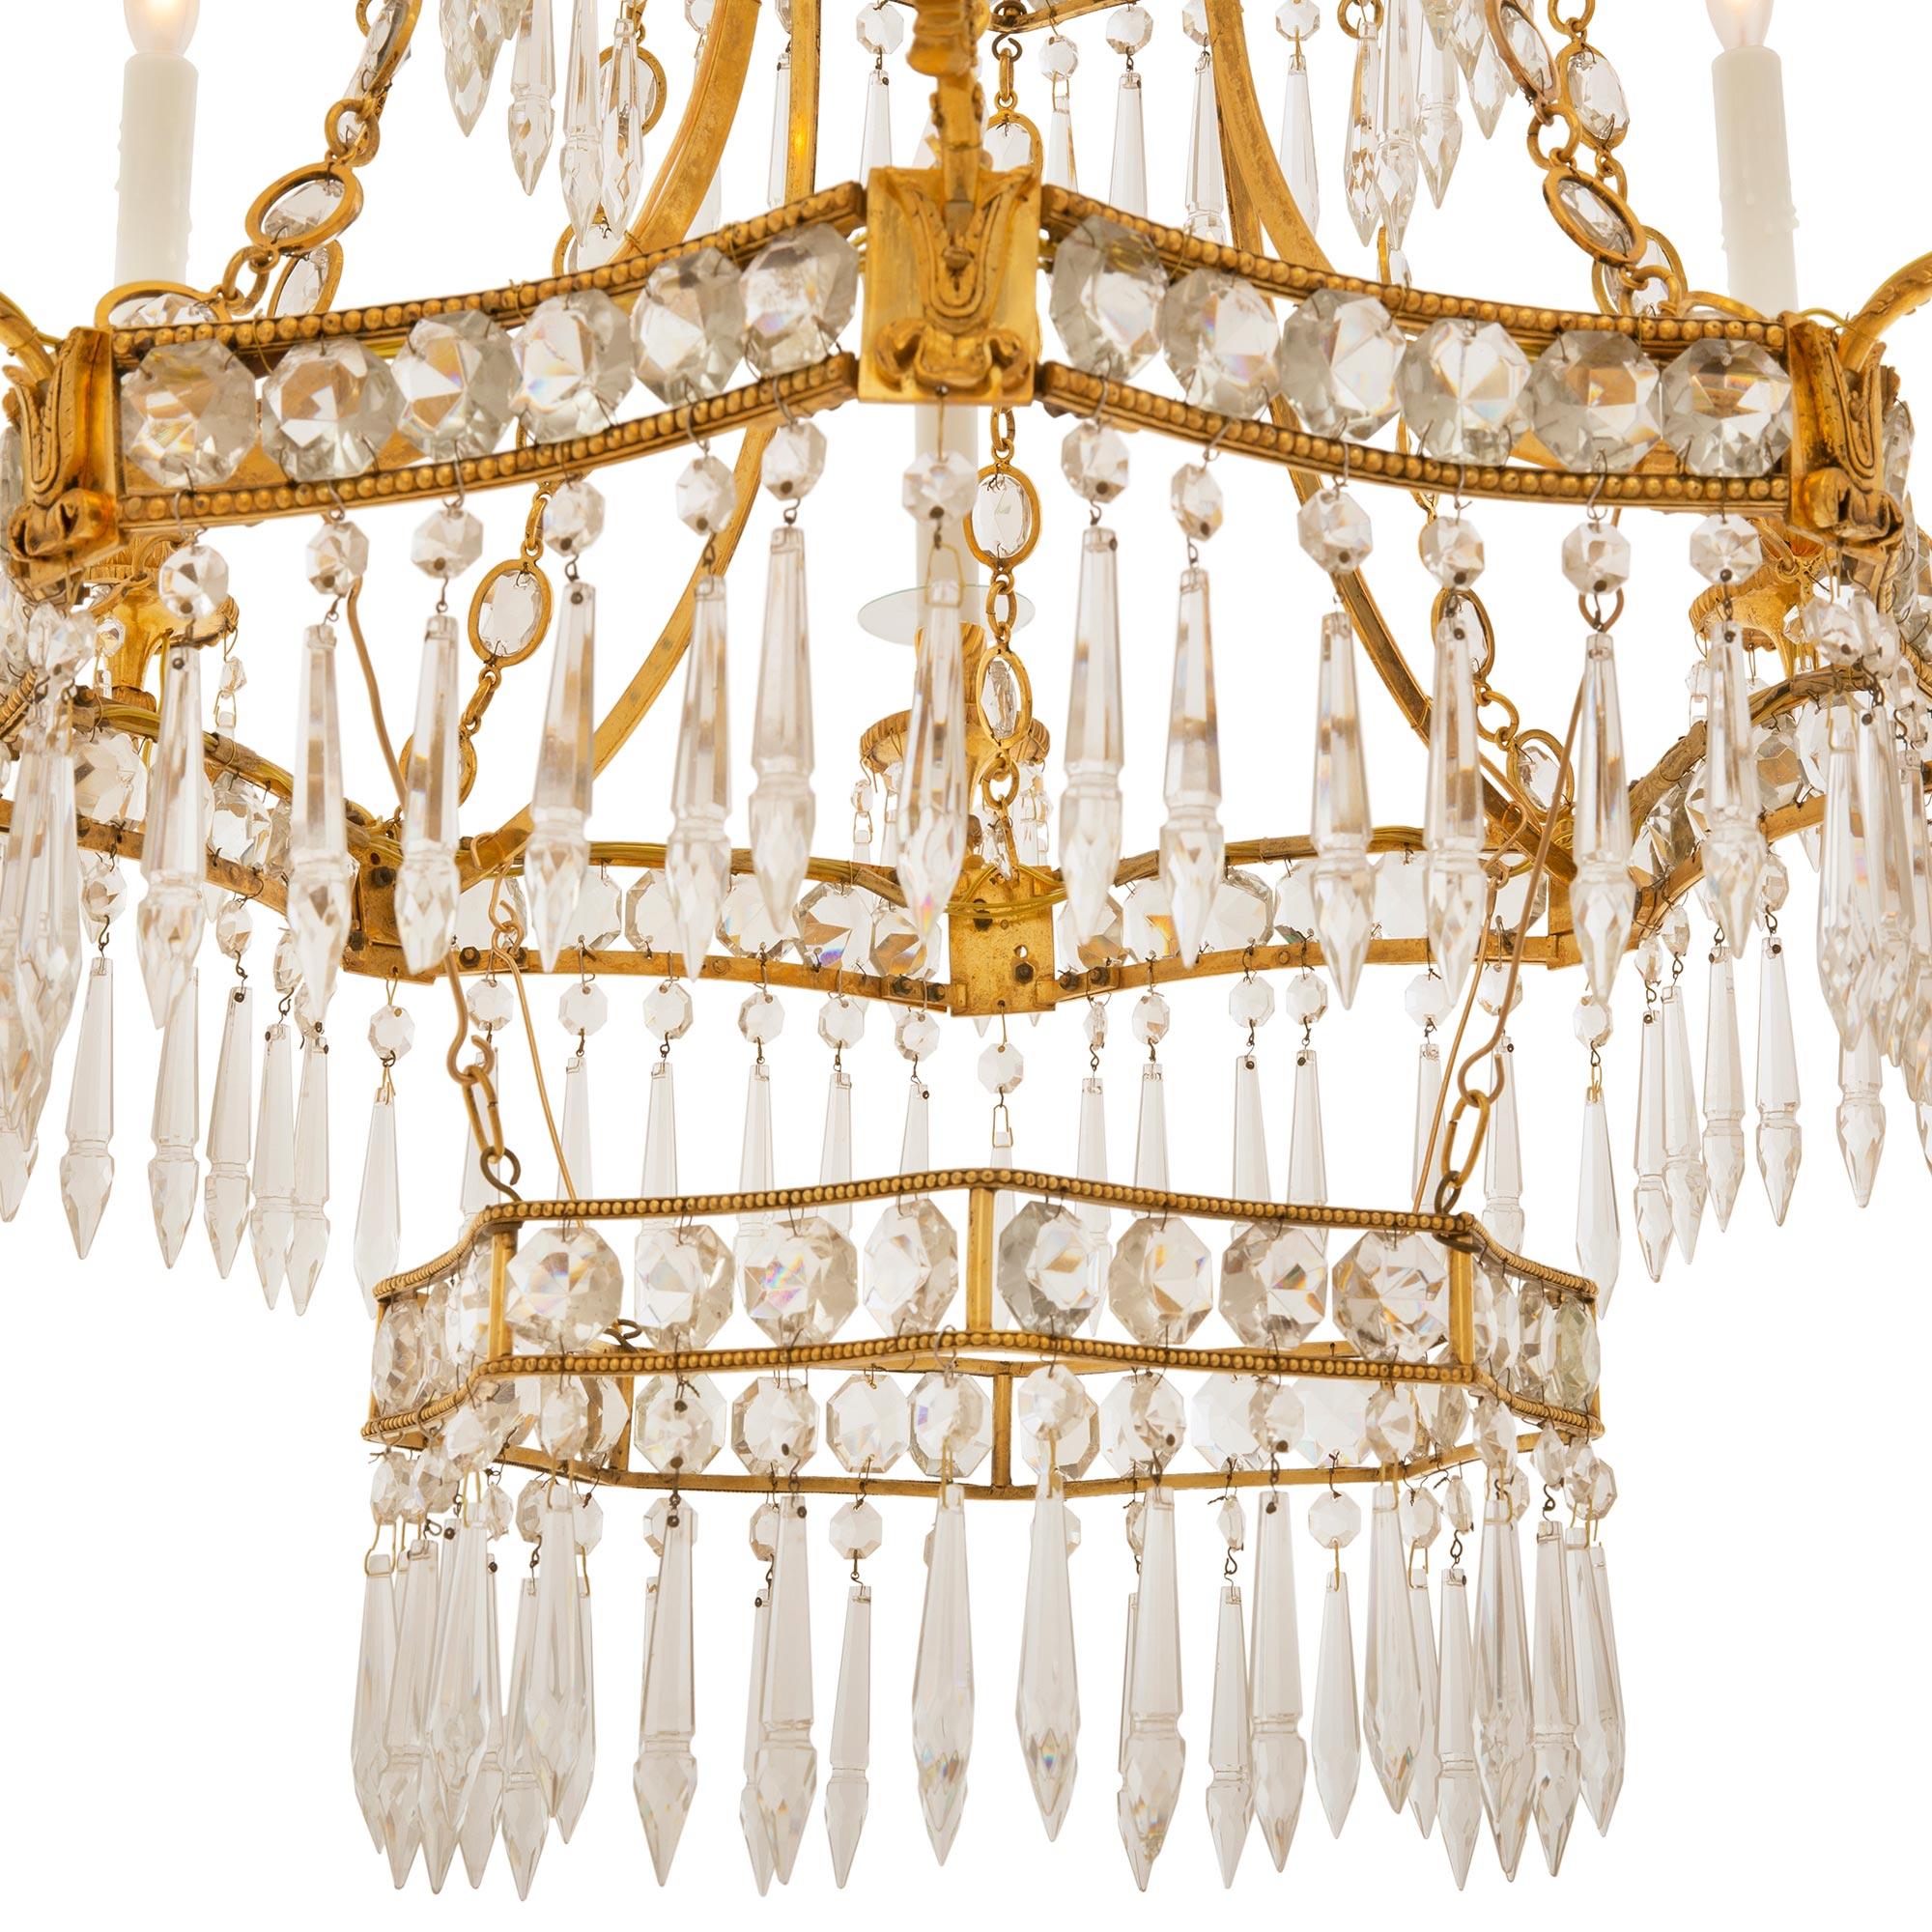 Baltic 19th Century Louis XVI St. Crystal And Ormolu Chandelier For Sale 3